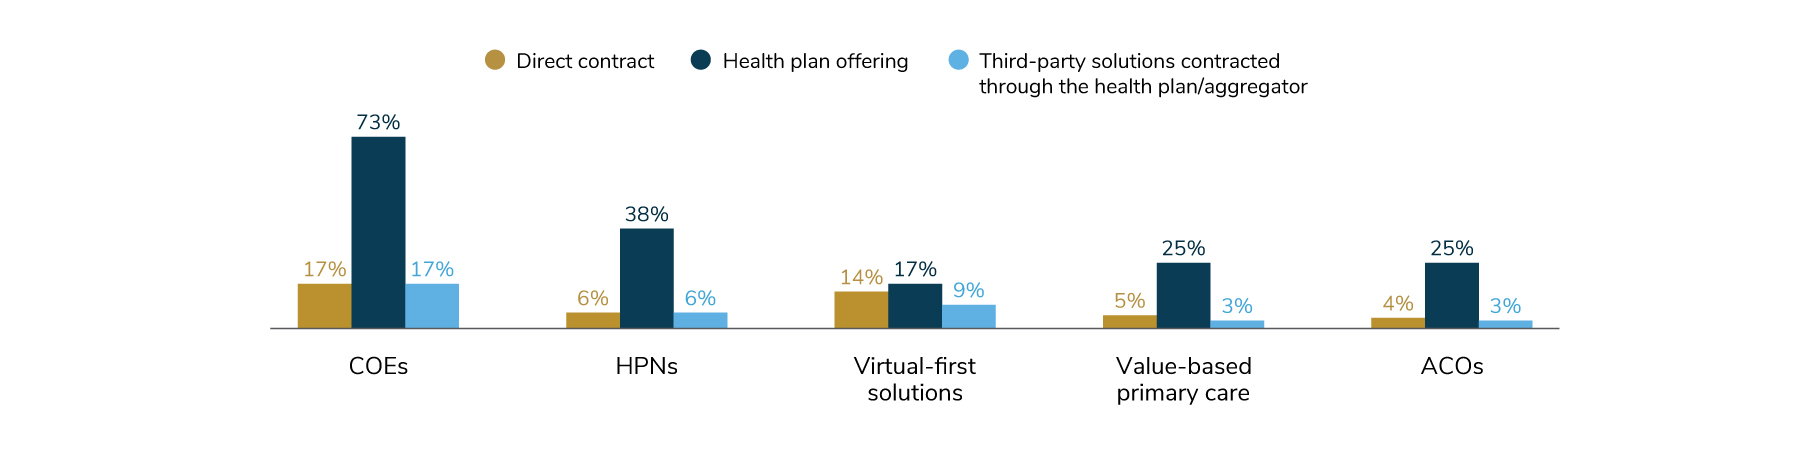 Most delivery reforms are done in conjunction with employers' health plans. For COEs, 73% of employers offer a COE through their health plan, 17% offer a COE through direct contracting, and 17% offer a COE in conjunction with a third-party solution.
